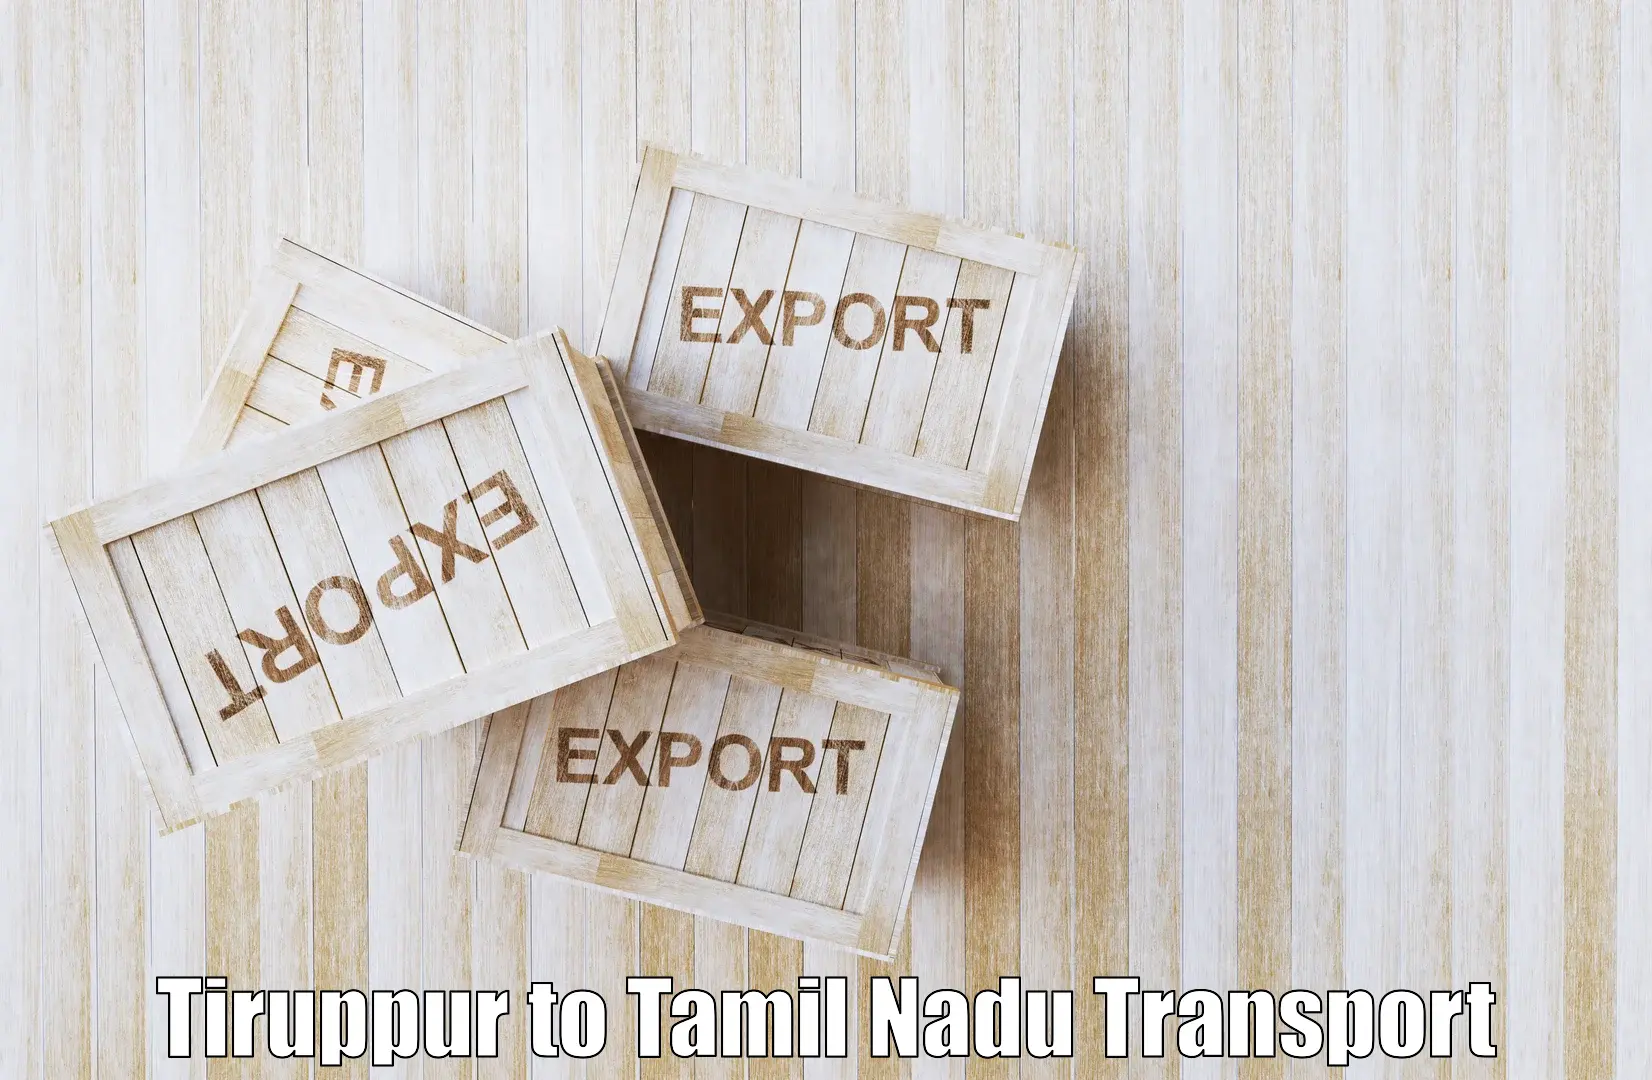 Best transport services in India Tiruppur to Chennai Port